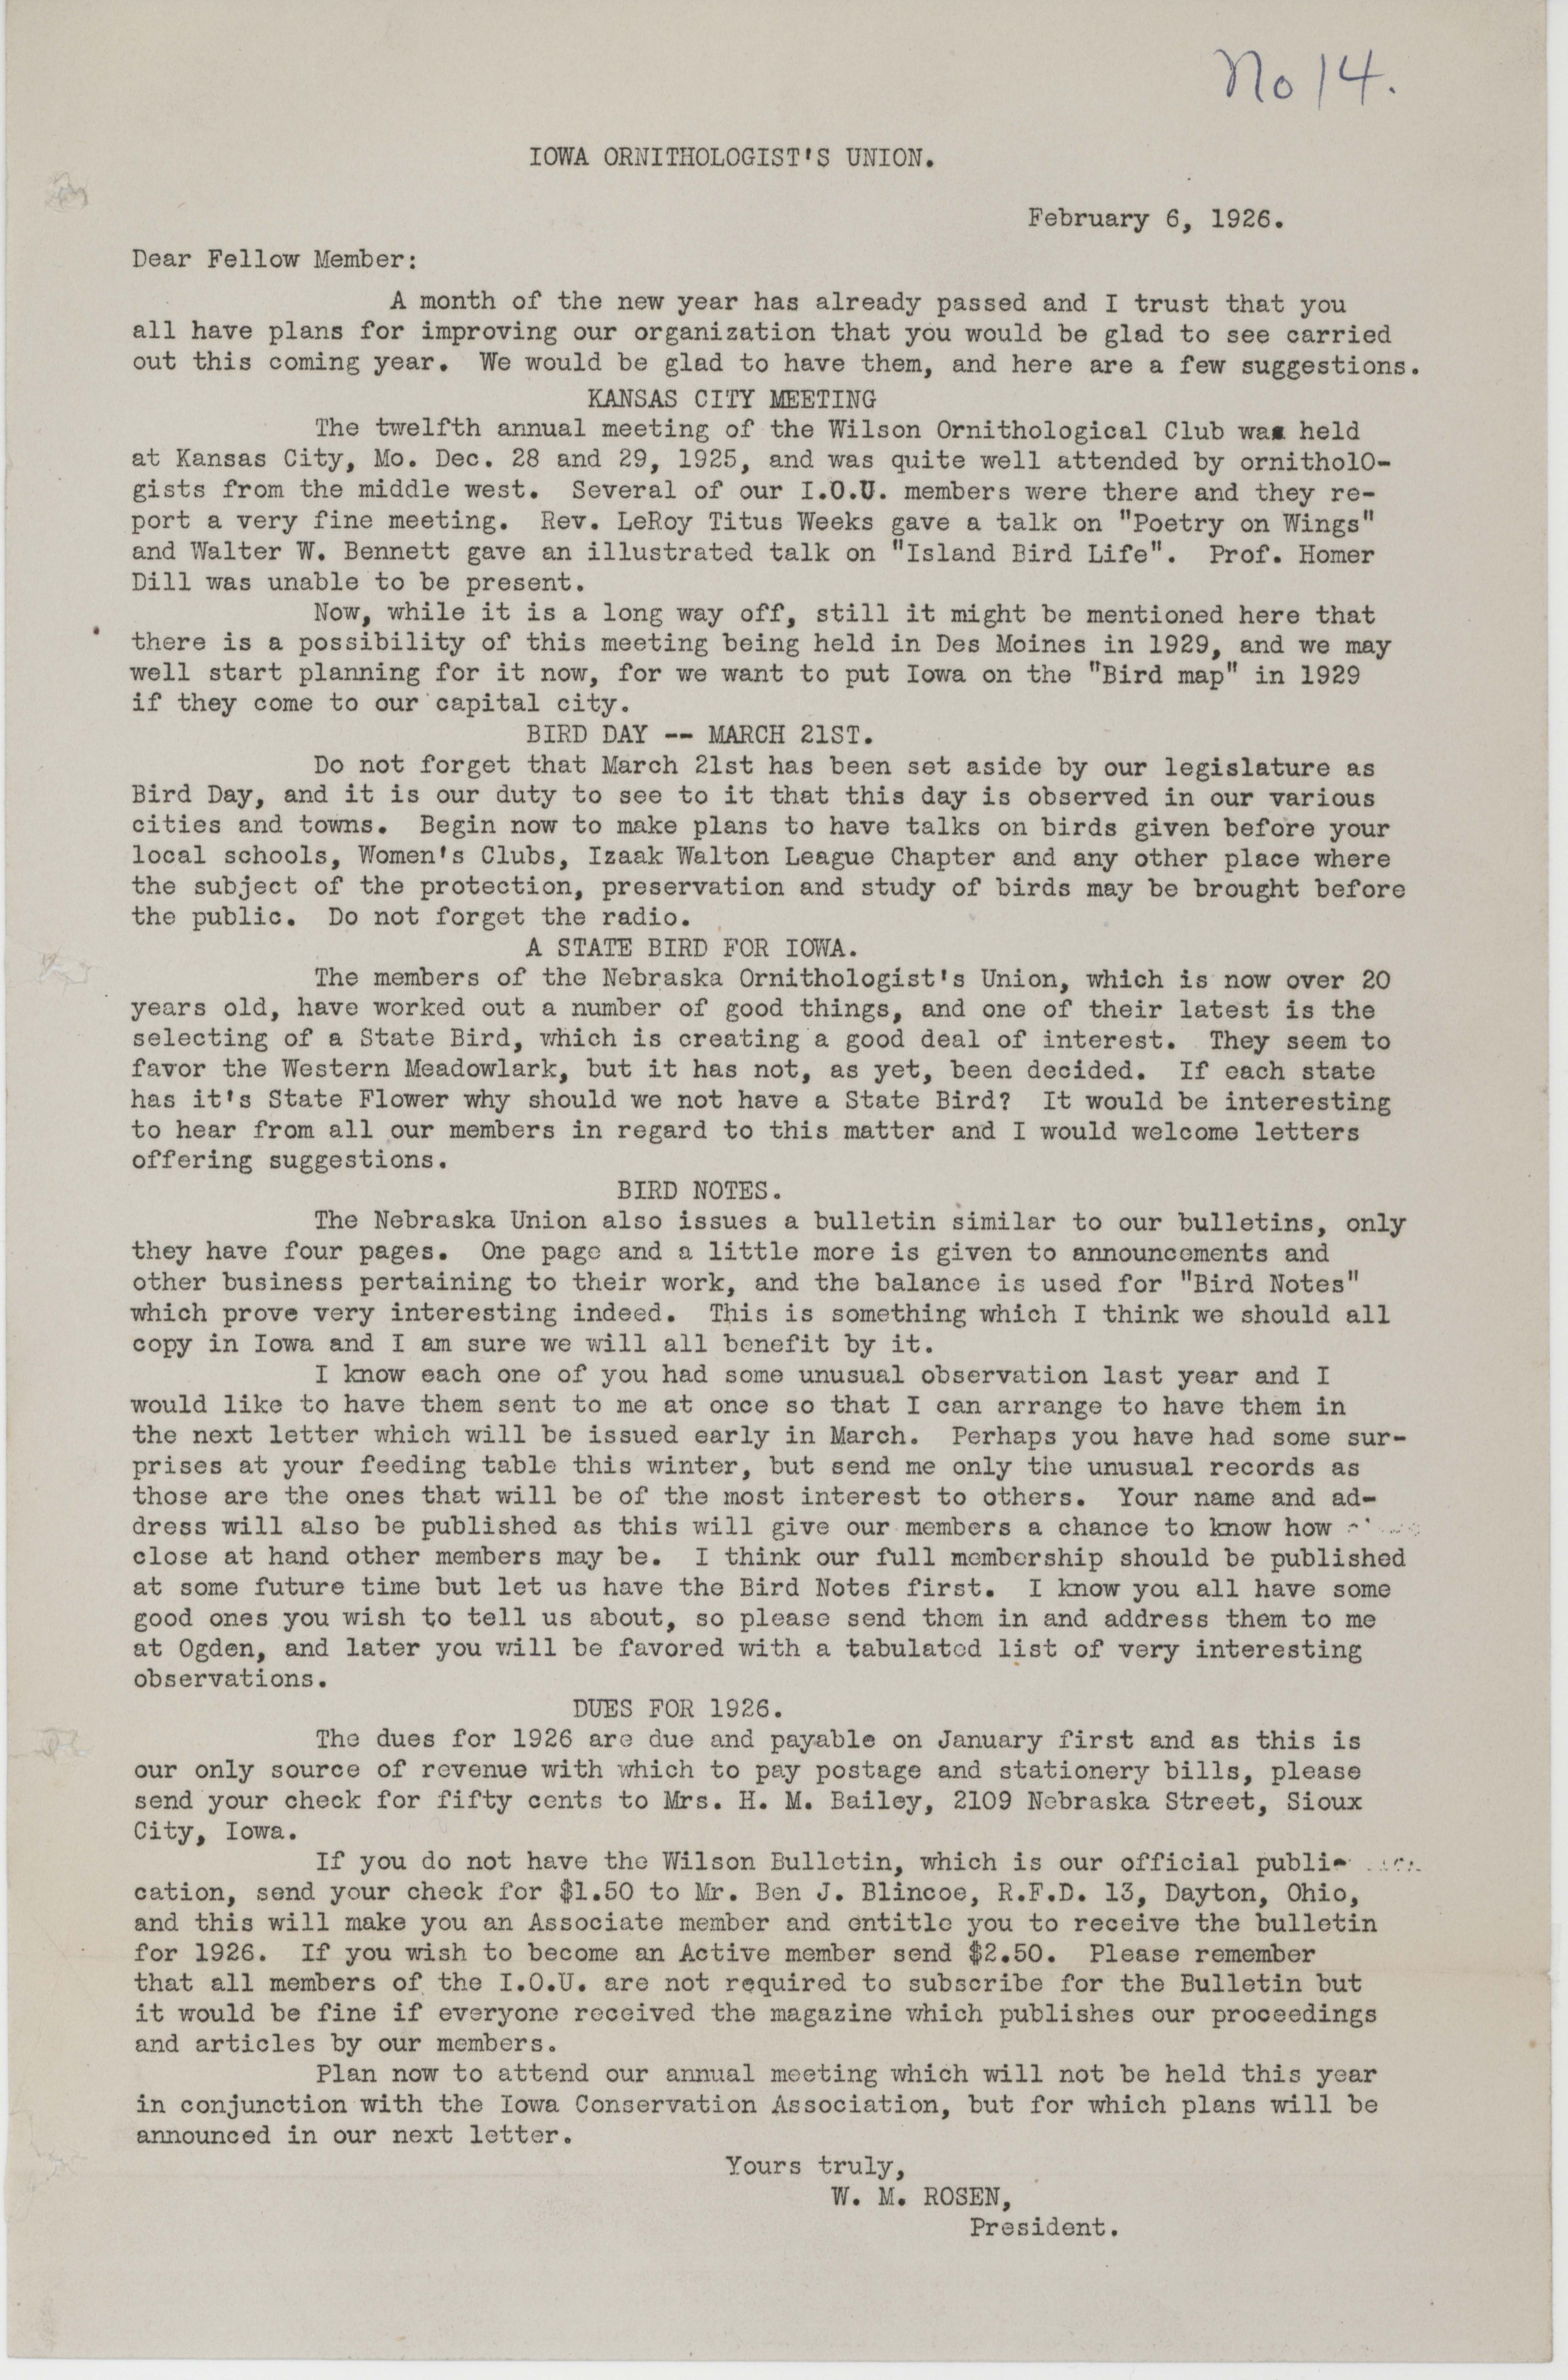 Letter to members of the Iowa Ornithologists' Union regarding future activities, February 6,1926